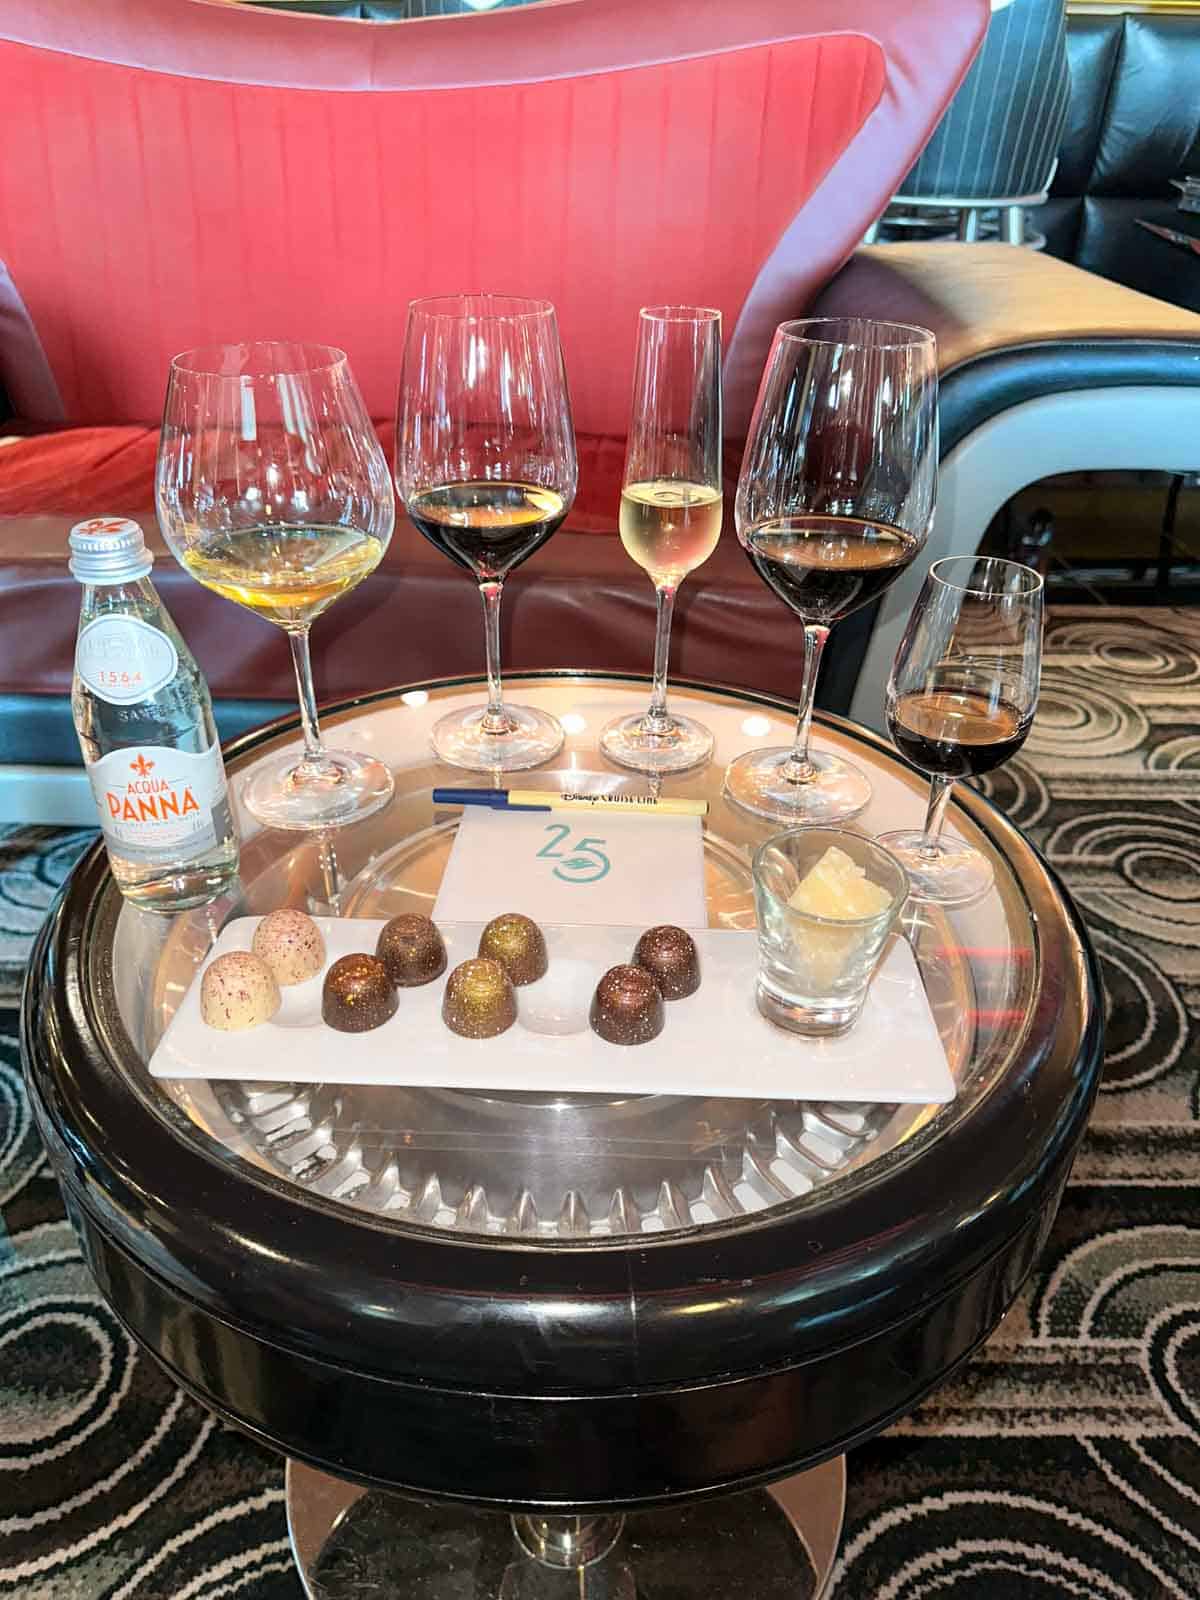 A small round table with wine glasses lined up and chocolates in front of them.